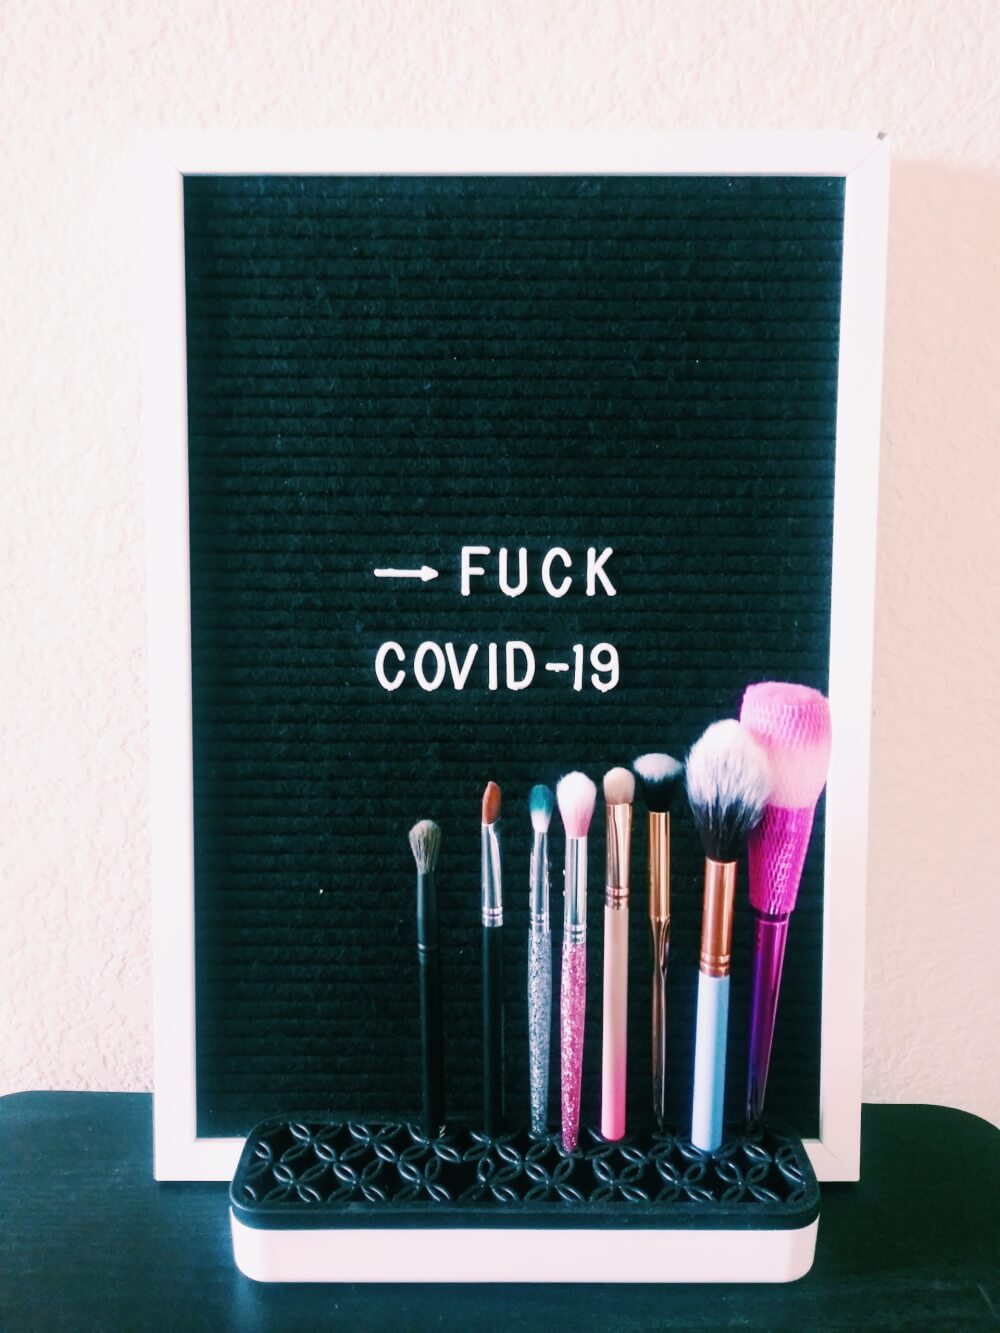 Letterboard saying "FUCK COVID-19" behind a row of makeup brushes